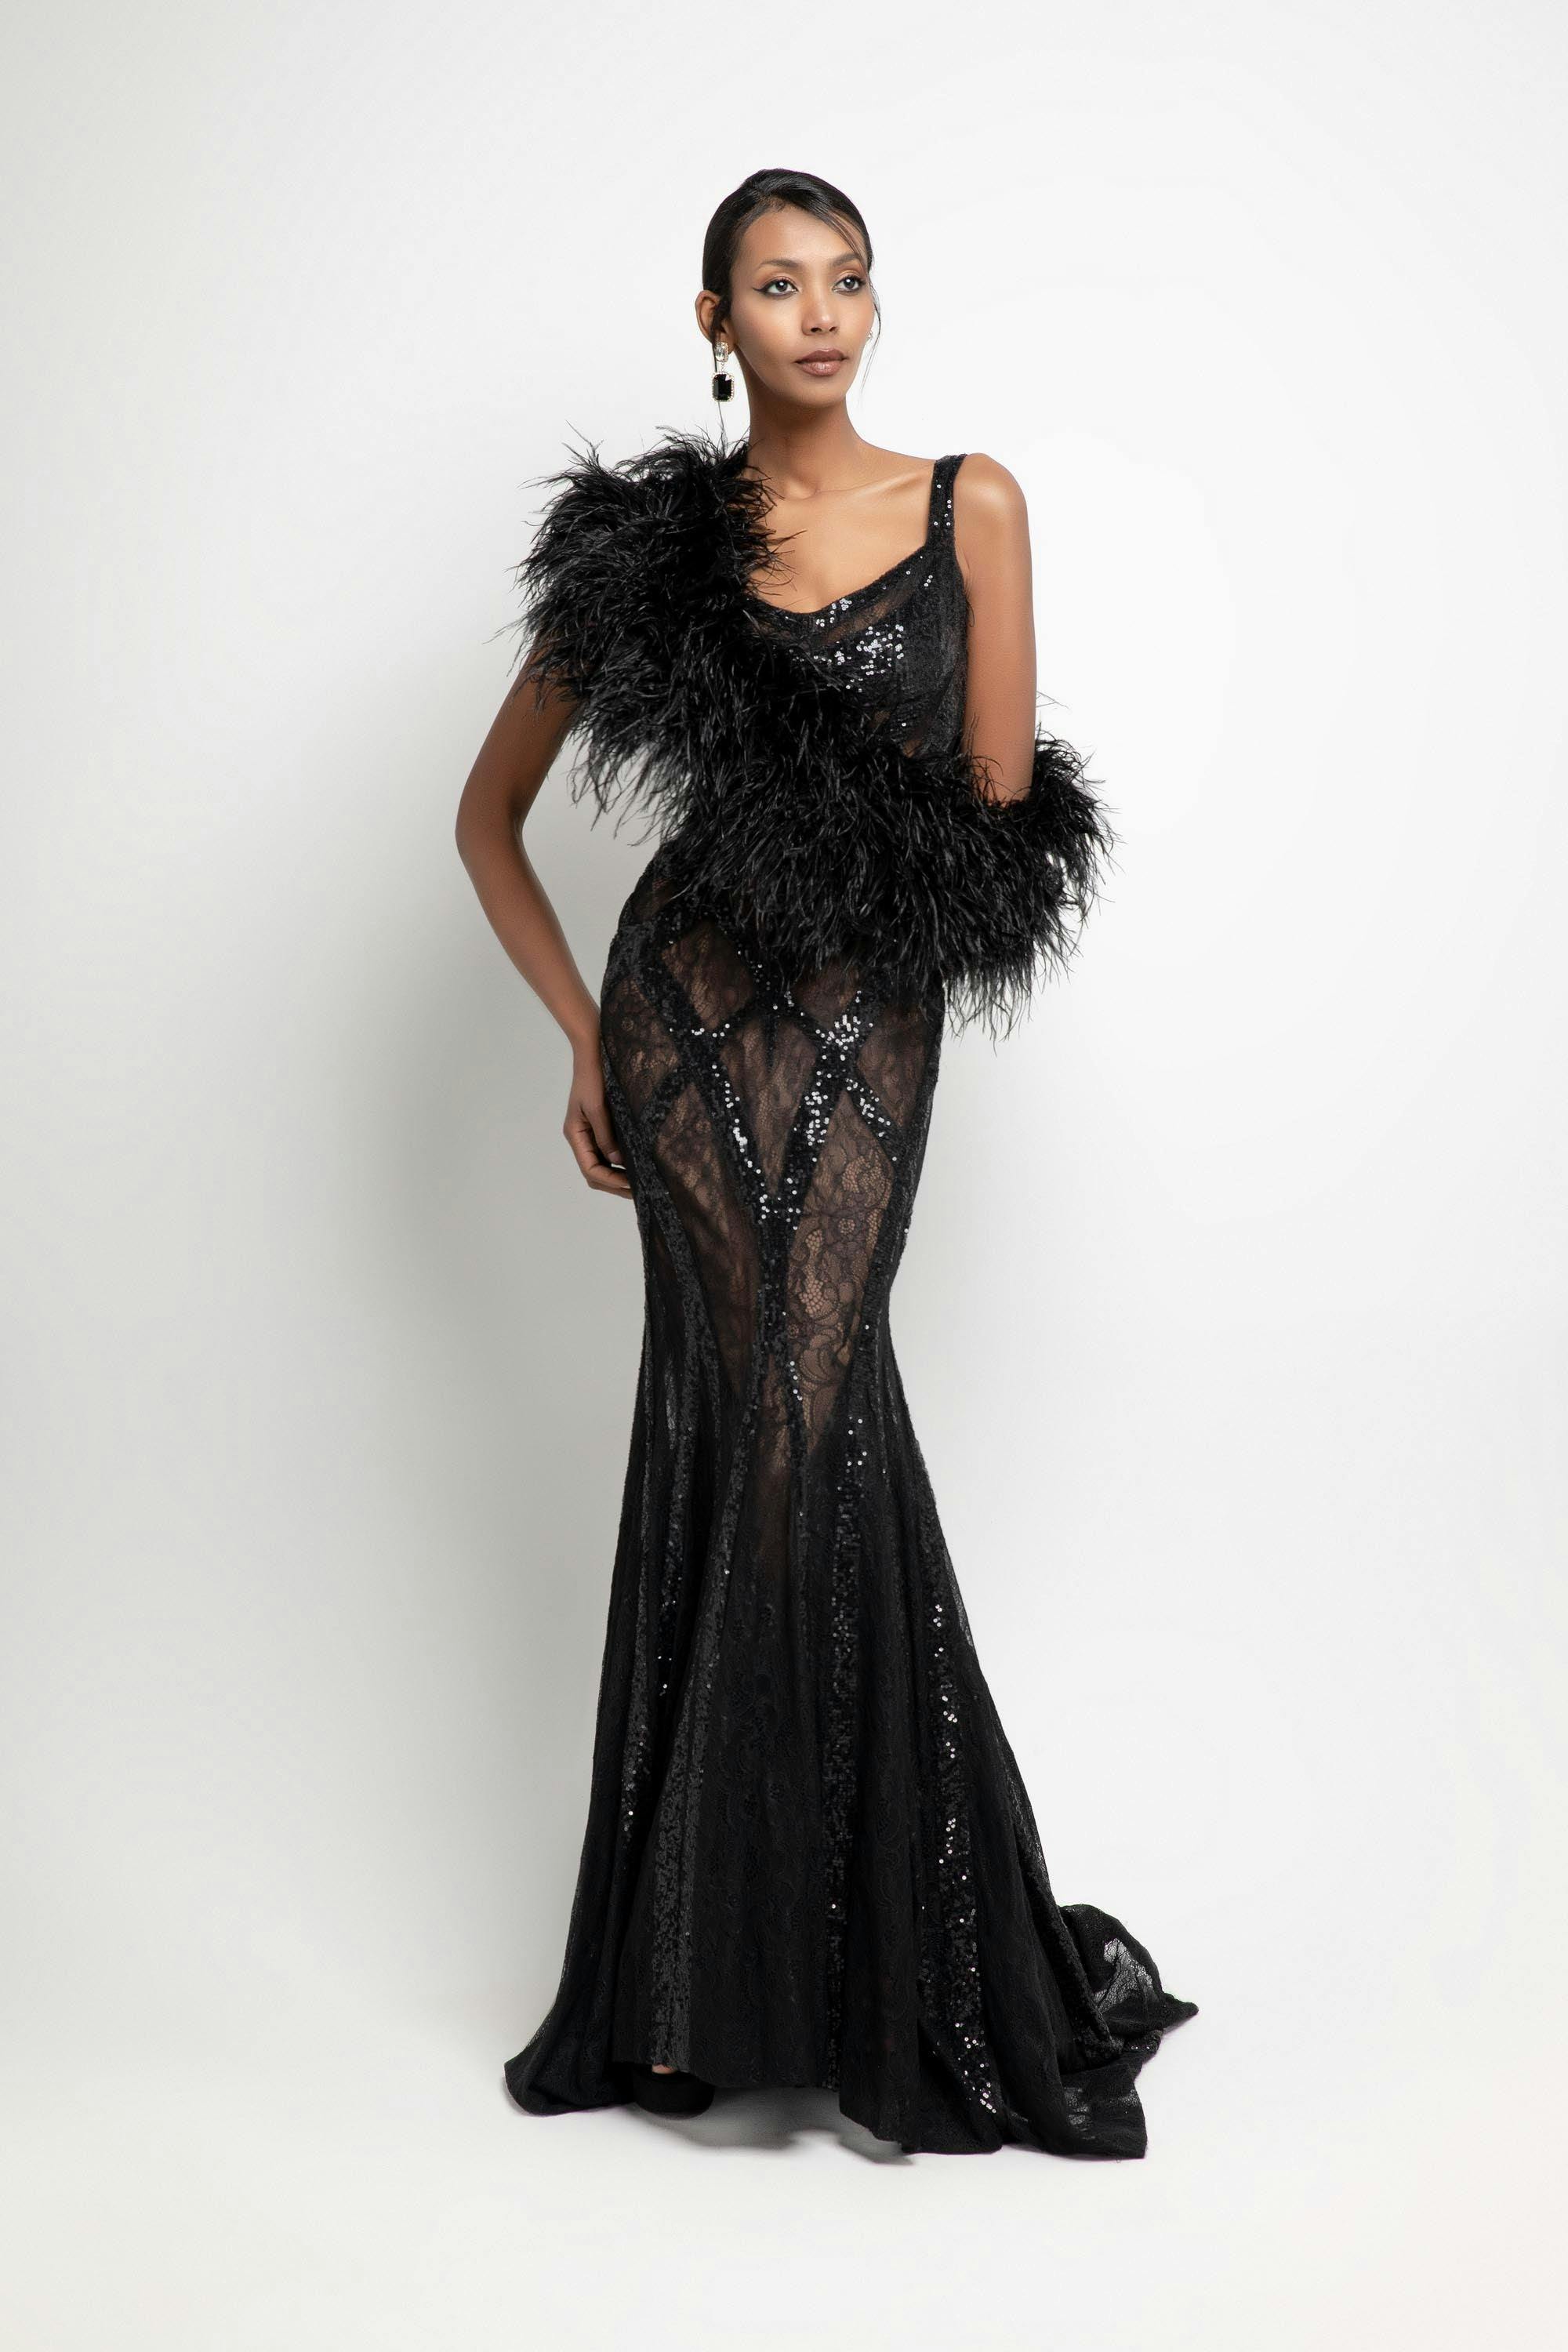 Look 10 B - Jean fares couture - JFC- Classy black feathers scarf